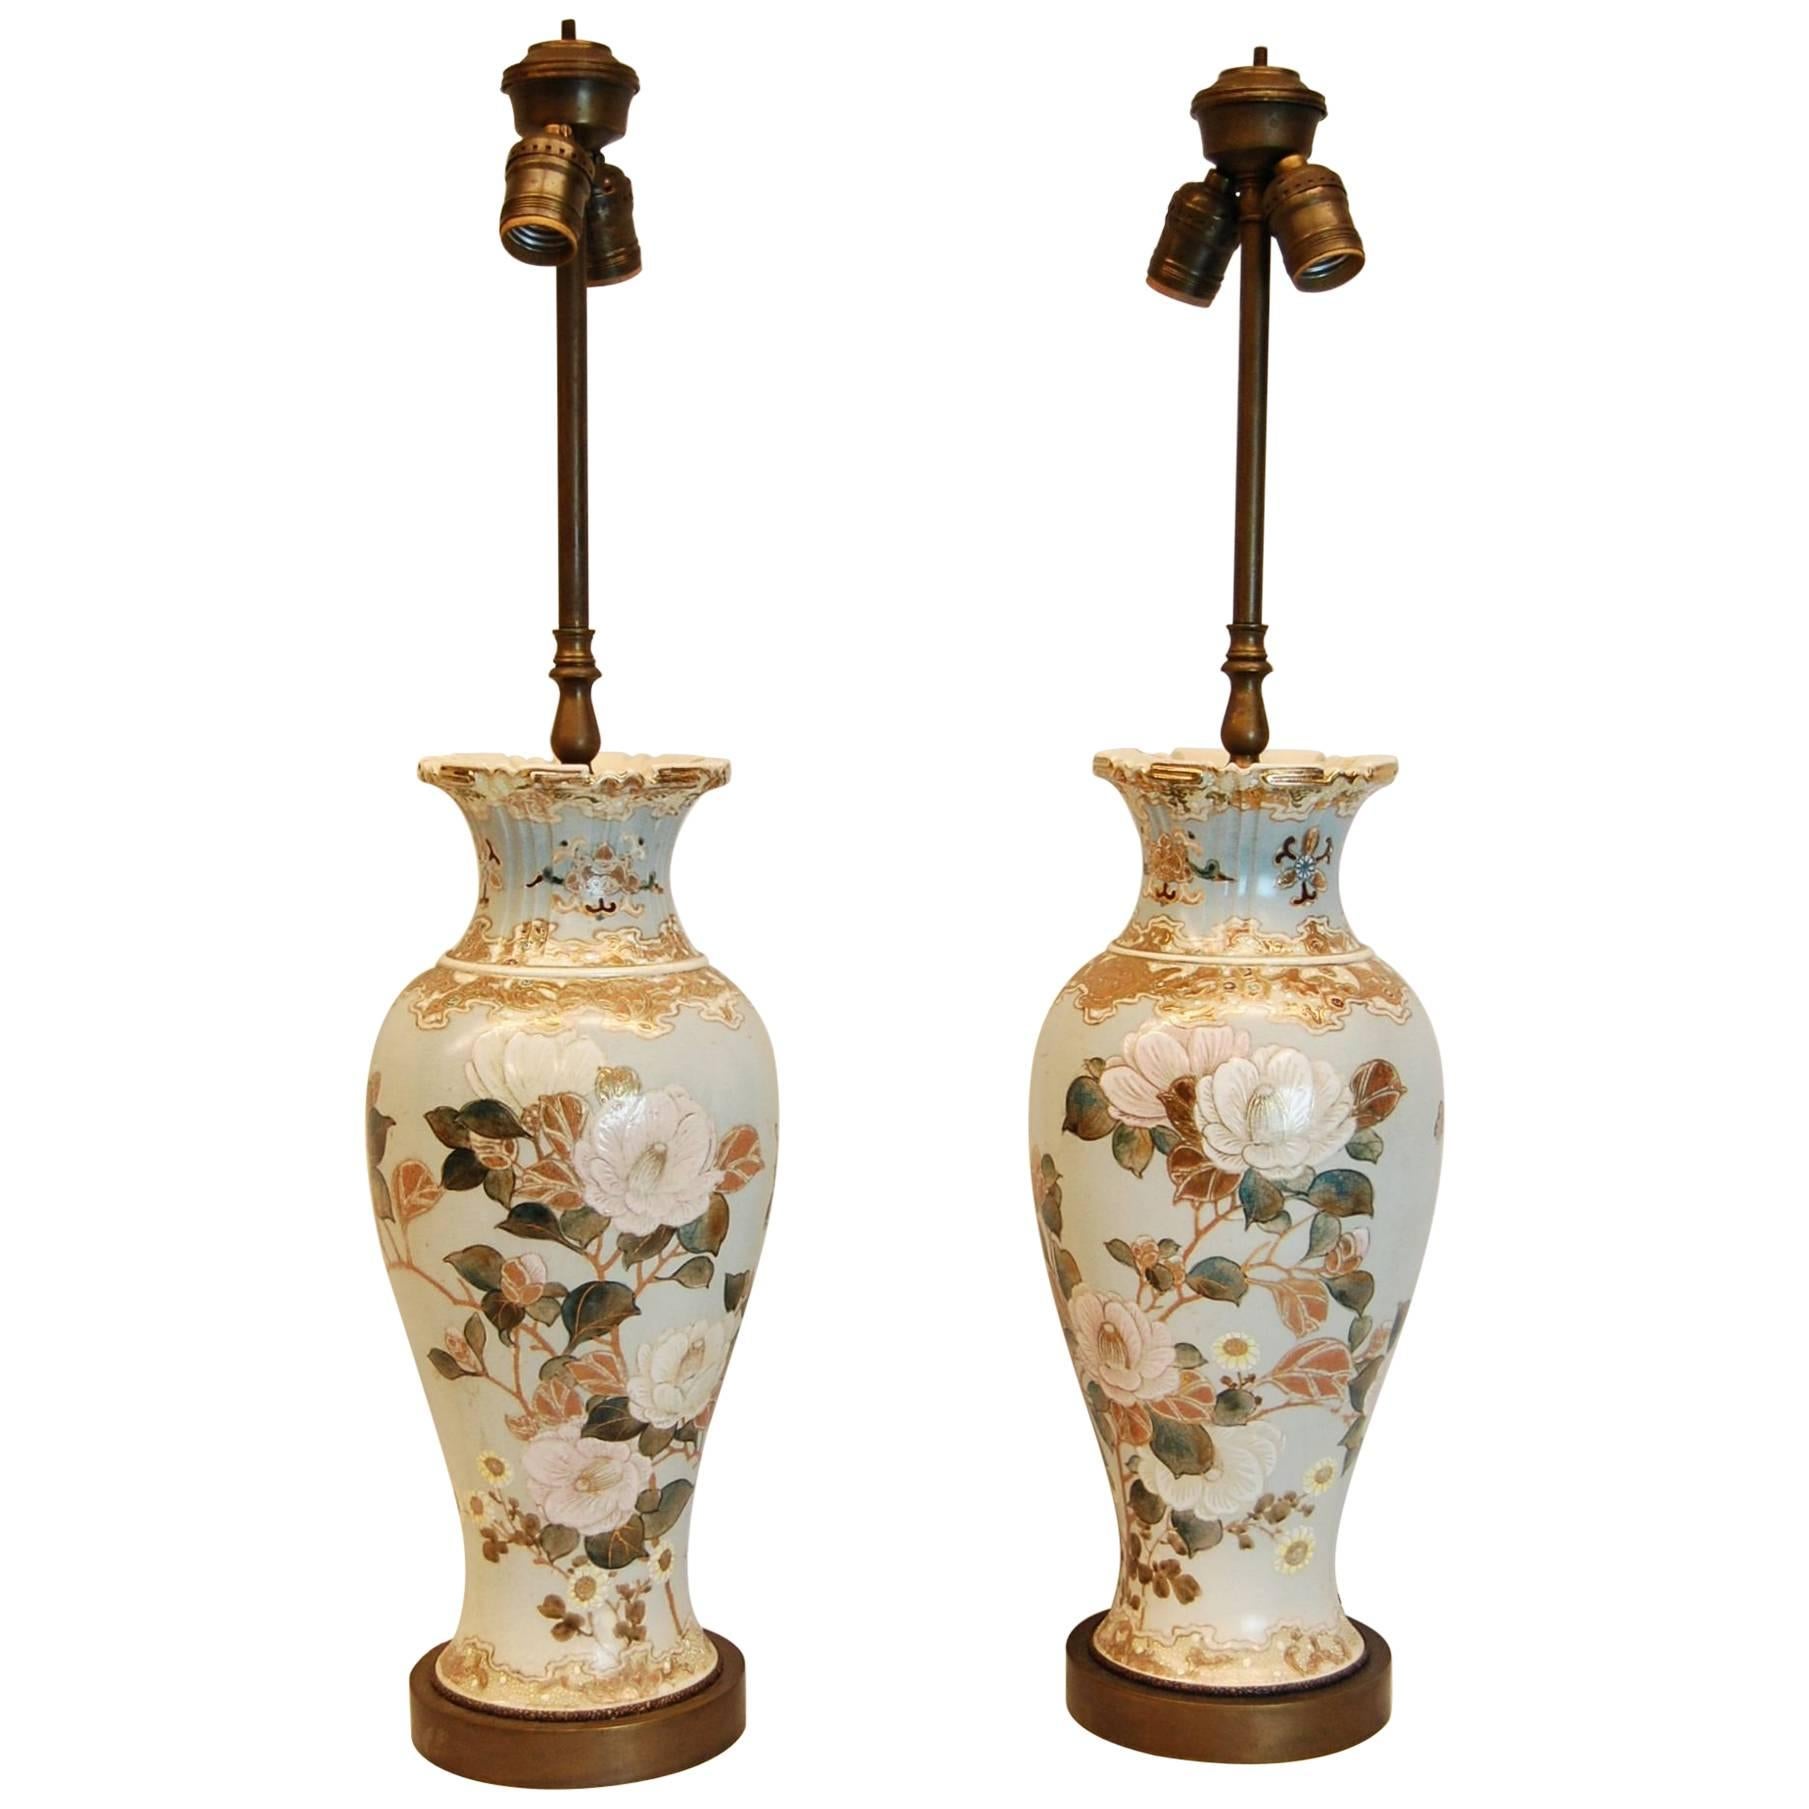 Pair of Floral and Gold Decorated Porcelain Vases Wired as Lamps, circa 1900